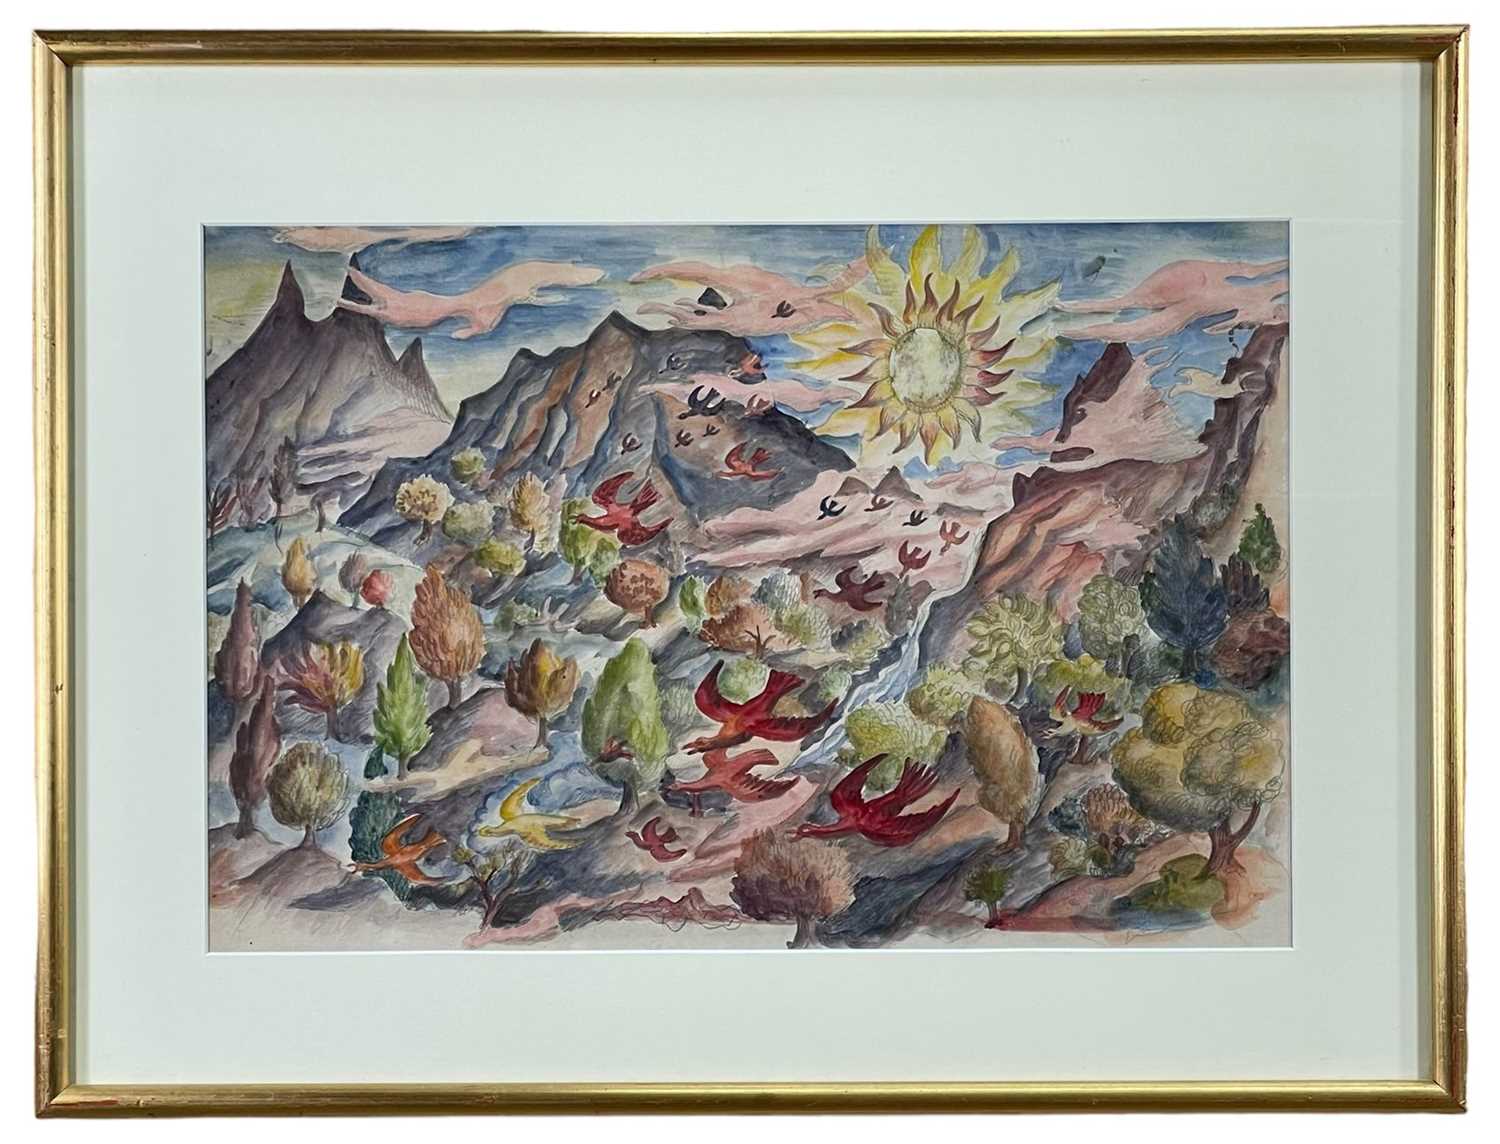 ‡ HELEN STEINTHAL (1911-1991) watercolour and pencil - flock of birds above landscape with sun and - Image 3 of 3